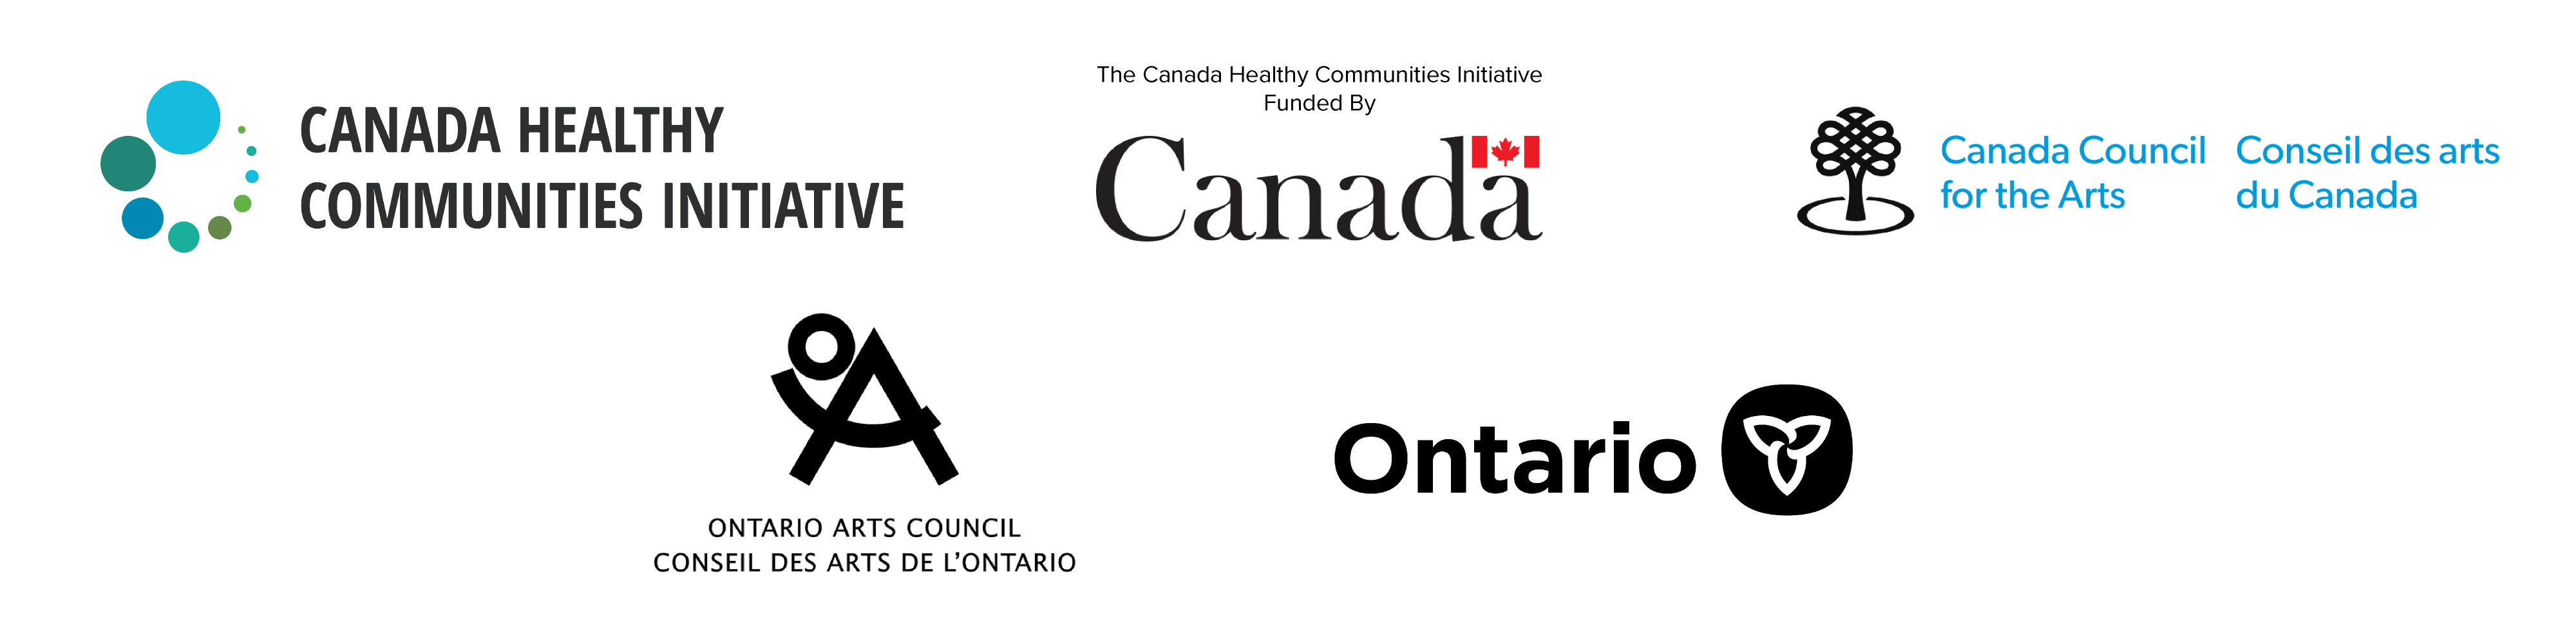 Logos for Canada Healthy Communities Initiative, Government of Canada, Canada Council for the Arts, Ontario Arts Council, and Government of Ontario